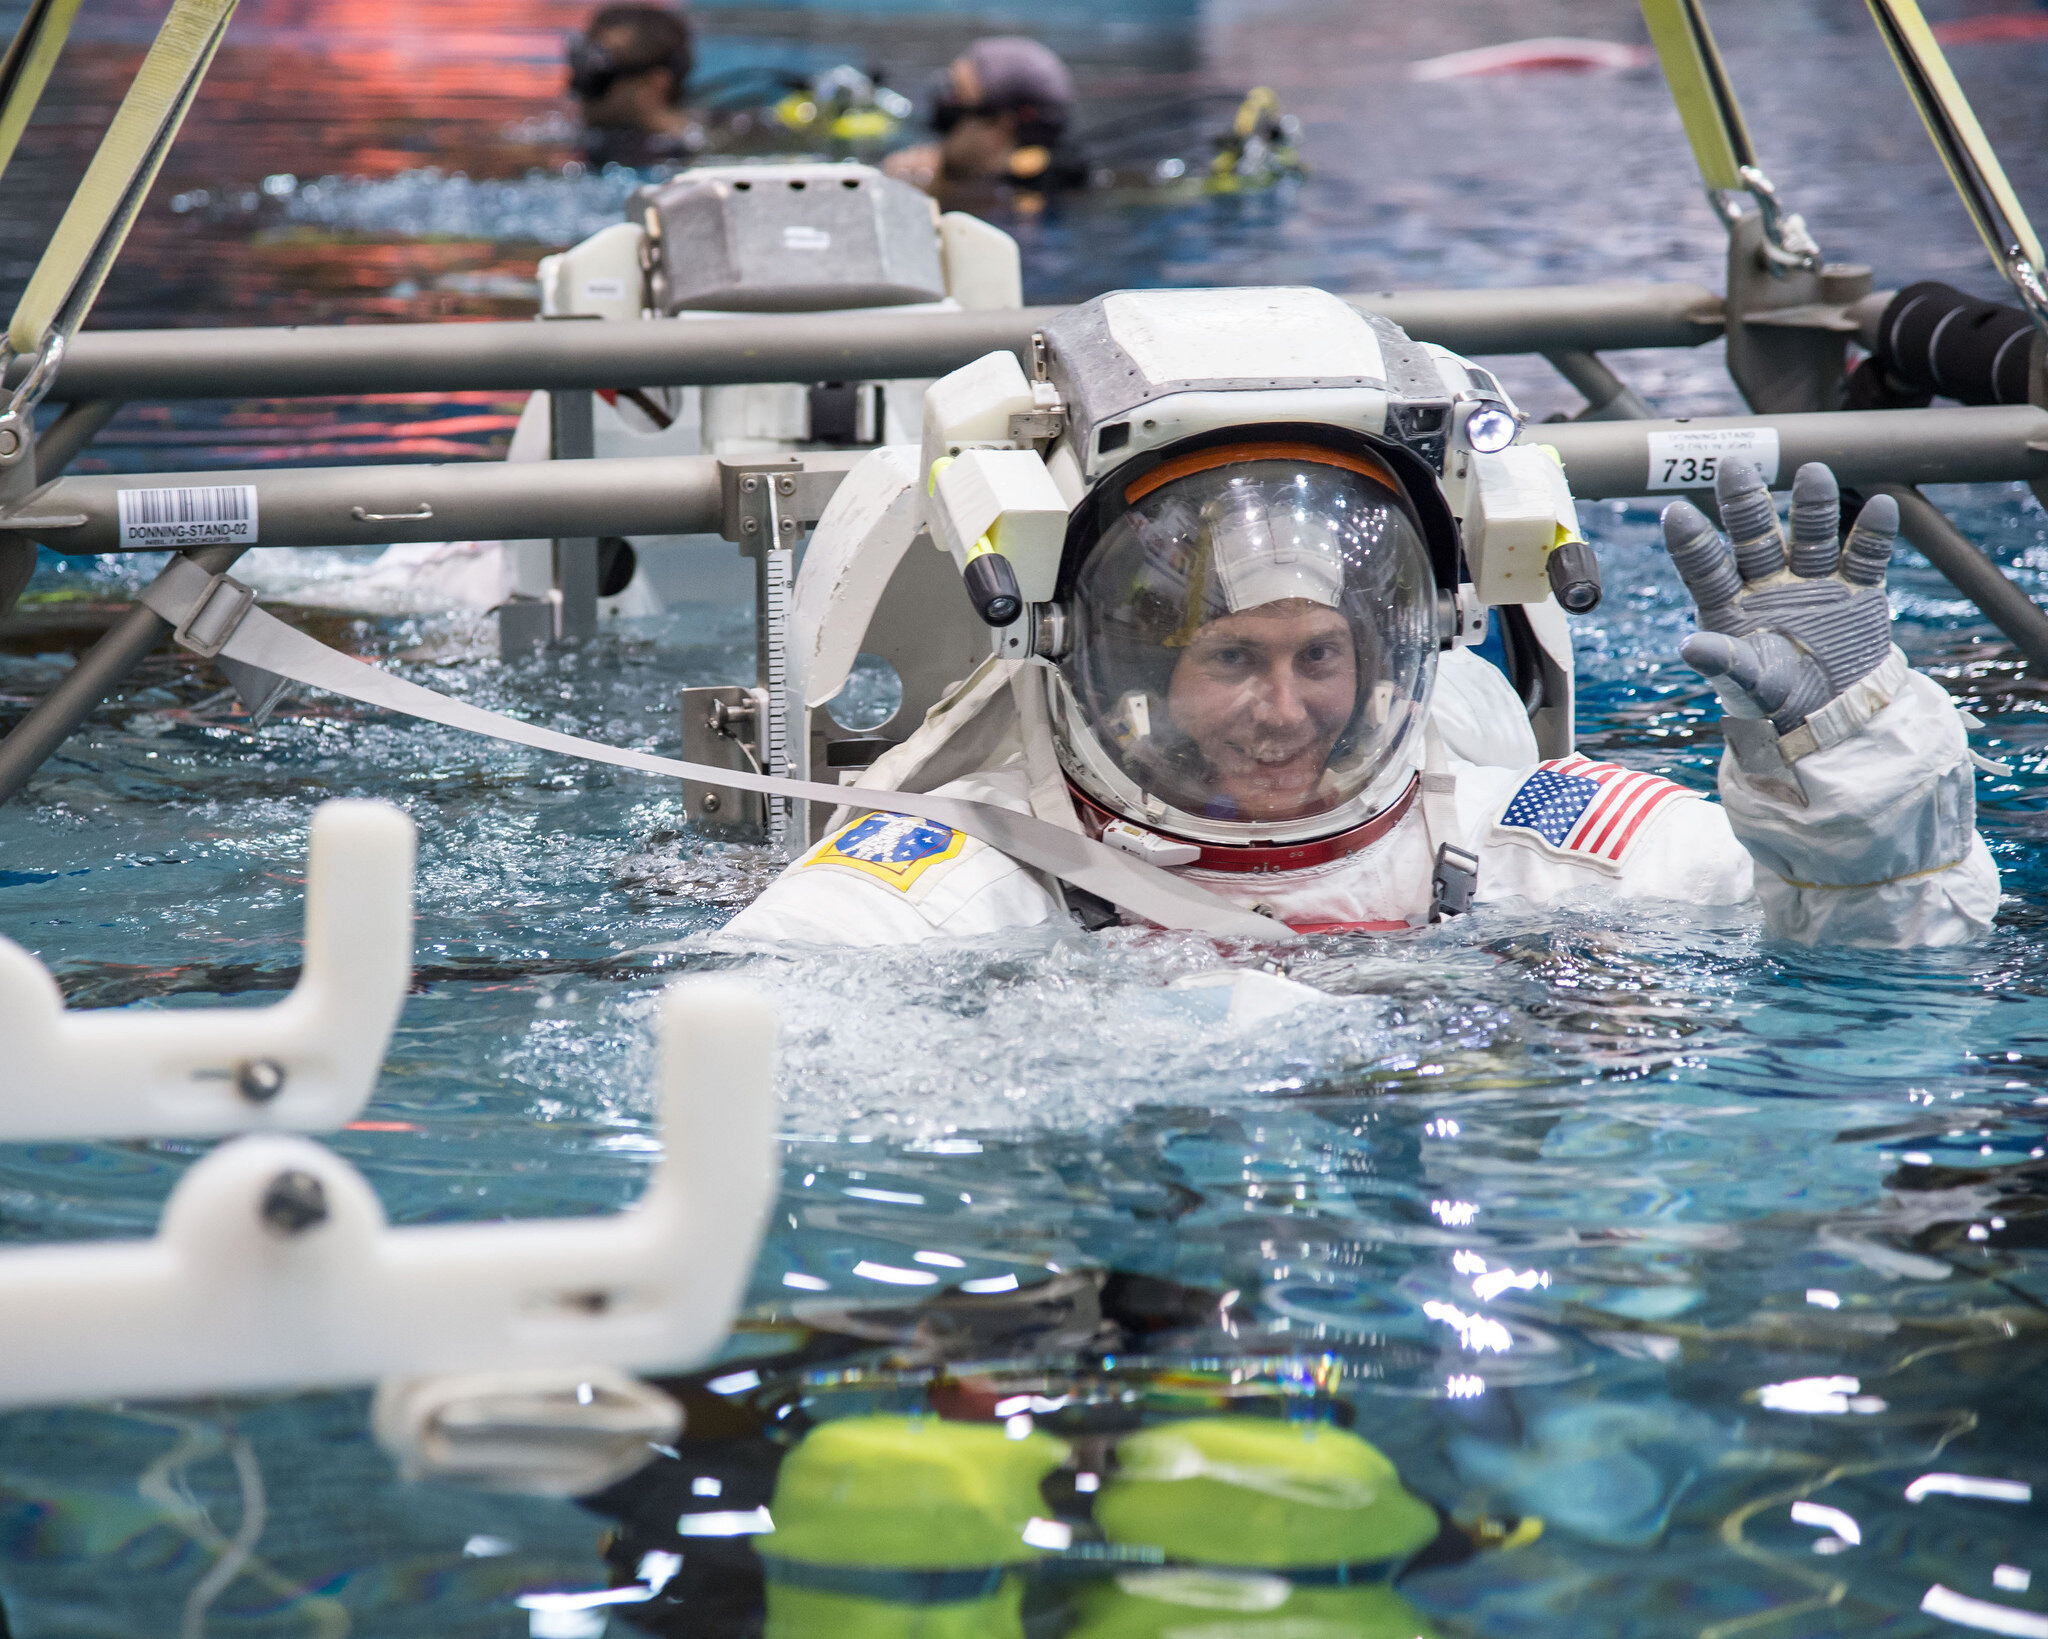 As part of his spacewalk training, Hague is submerged in water.